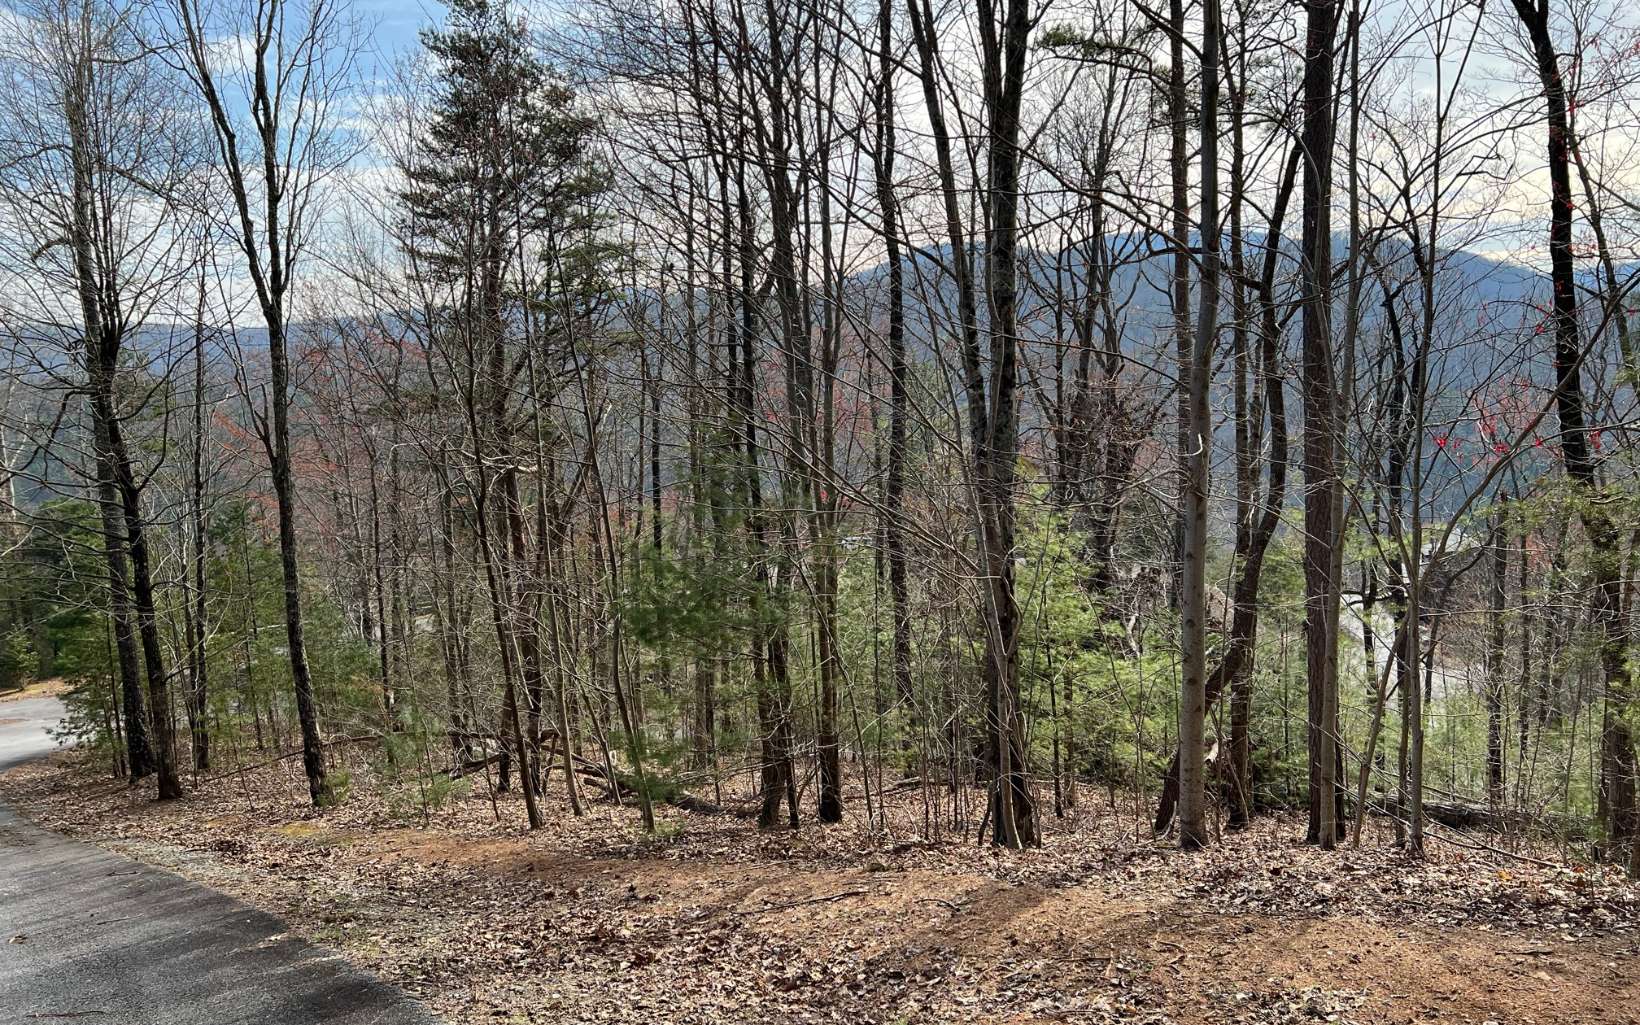 This 1.8 acre lot is located in the upscale cabin community of Stanley Creek. Located in the heart of the Aska Adventure area, it Features year-round long-range mountain views, all paved roads, and underground utilities. This lot is within two miles of one of the most scenic rivers in North GA; the Toccoa River. The Toccoa offers great canoeing/ Kayaking, float tubing, and some of the best trout fishing in GA. It is also located close to the Rich Mountain Wildlife Management area for hunting. The area is surrounded by national forest land that offers many hiking trails or mountain biking, and the Appalachian Trail (Springer Mountain) is only minutes away. This community is perfect for a second home, or your full-time dream home!